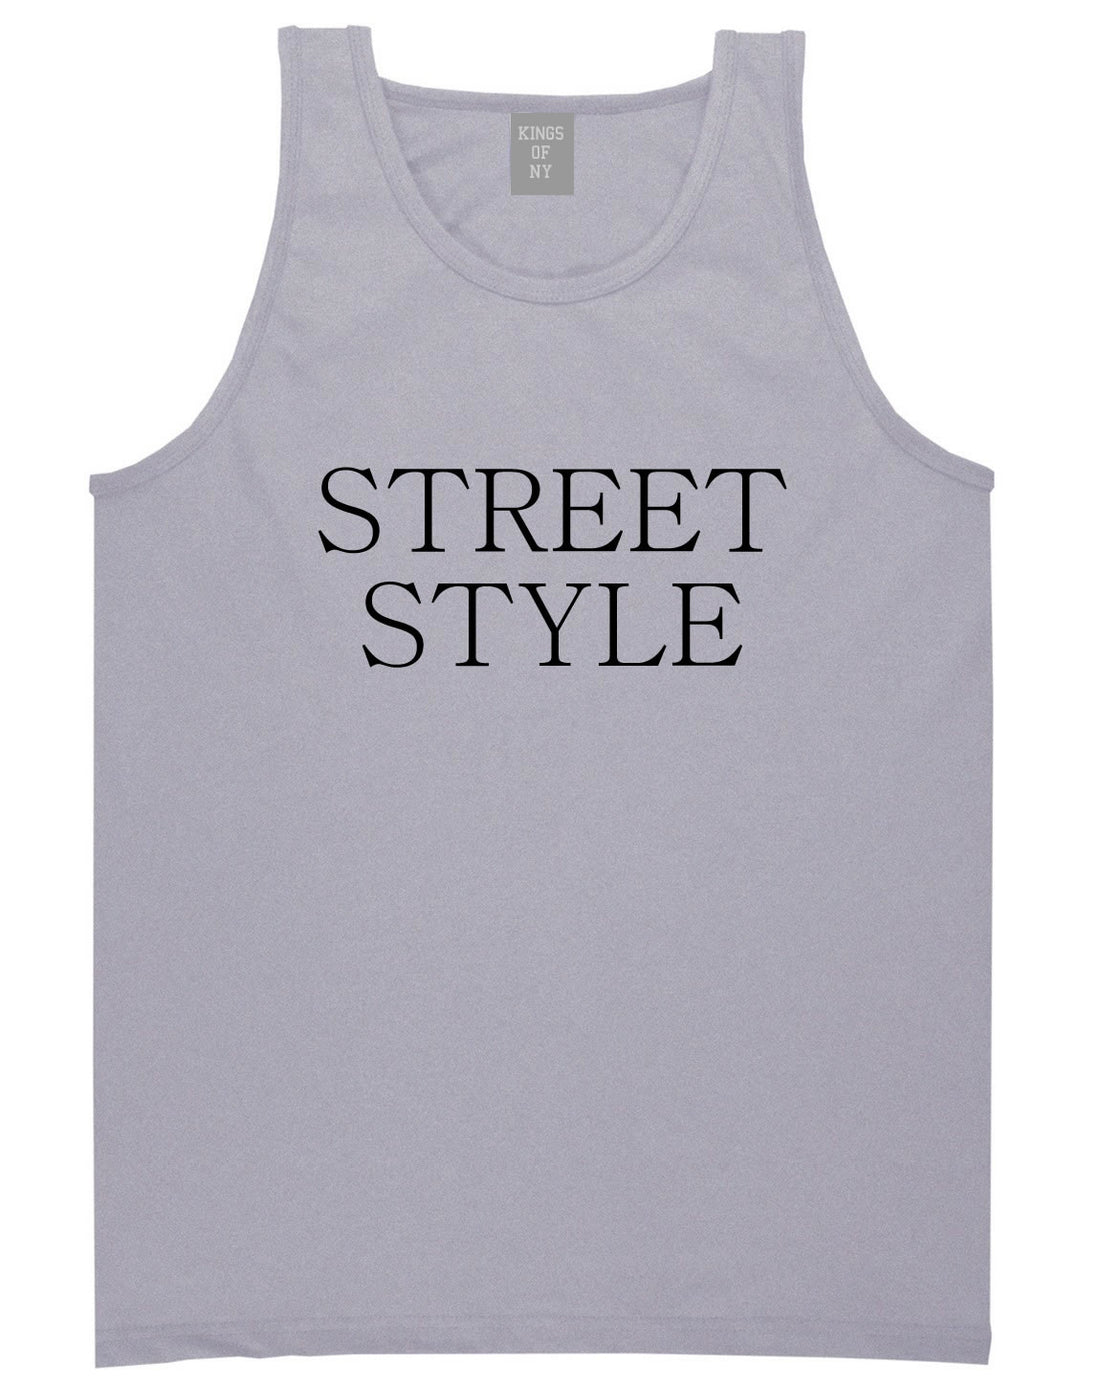 Street Style Photography Tank Top in Grey by Kings Of NY